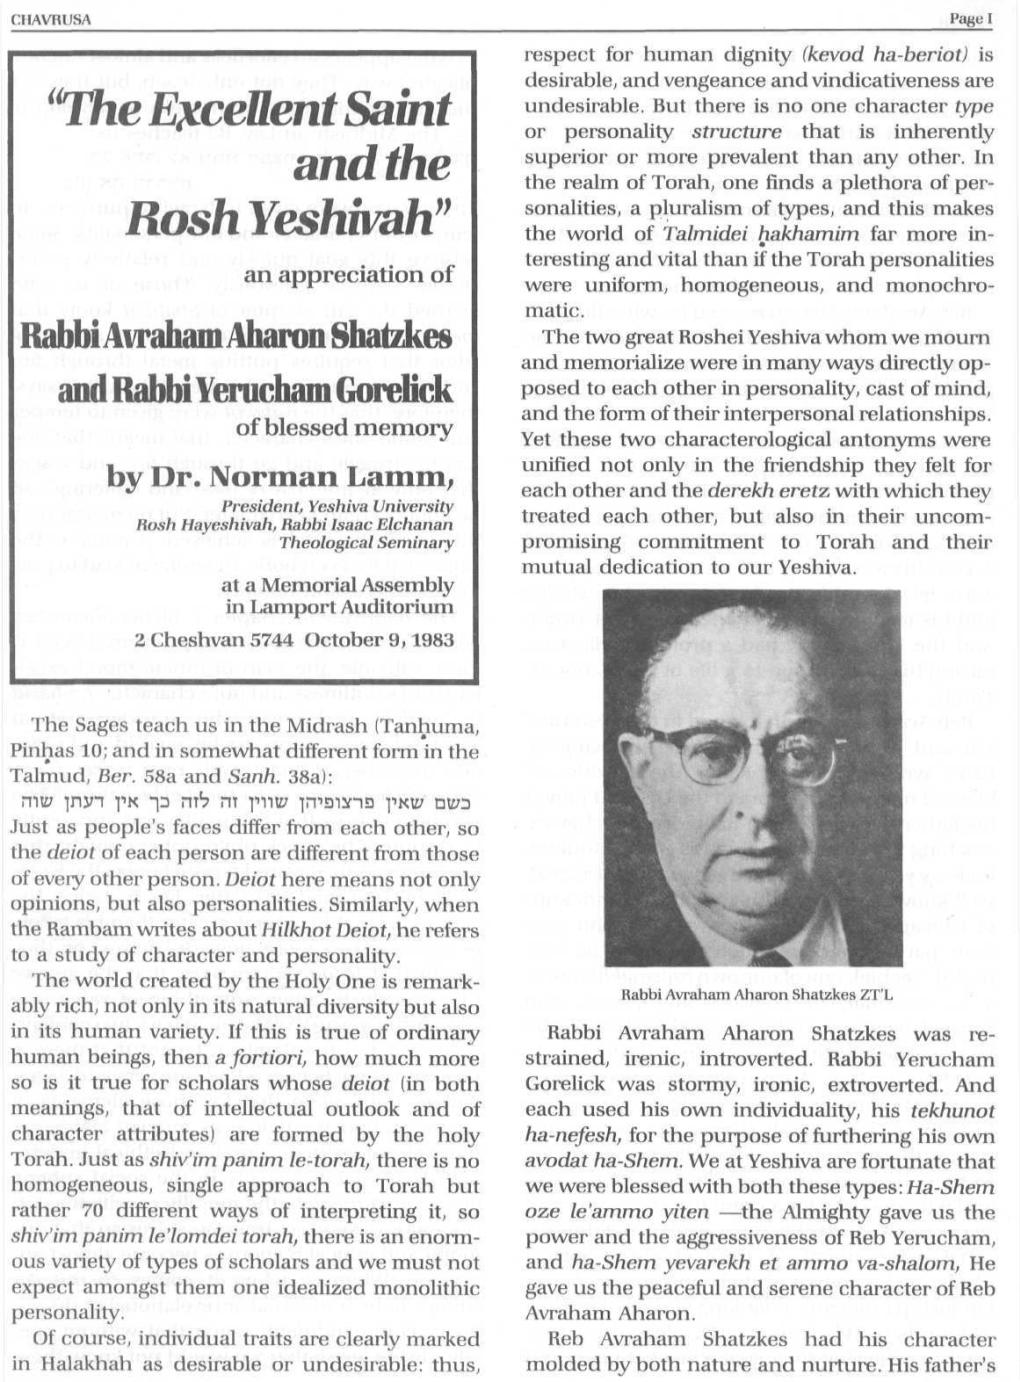 "The Excellent Saint and the Rosh Yeshivah"